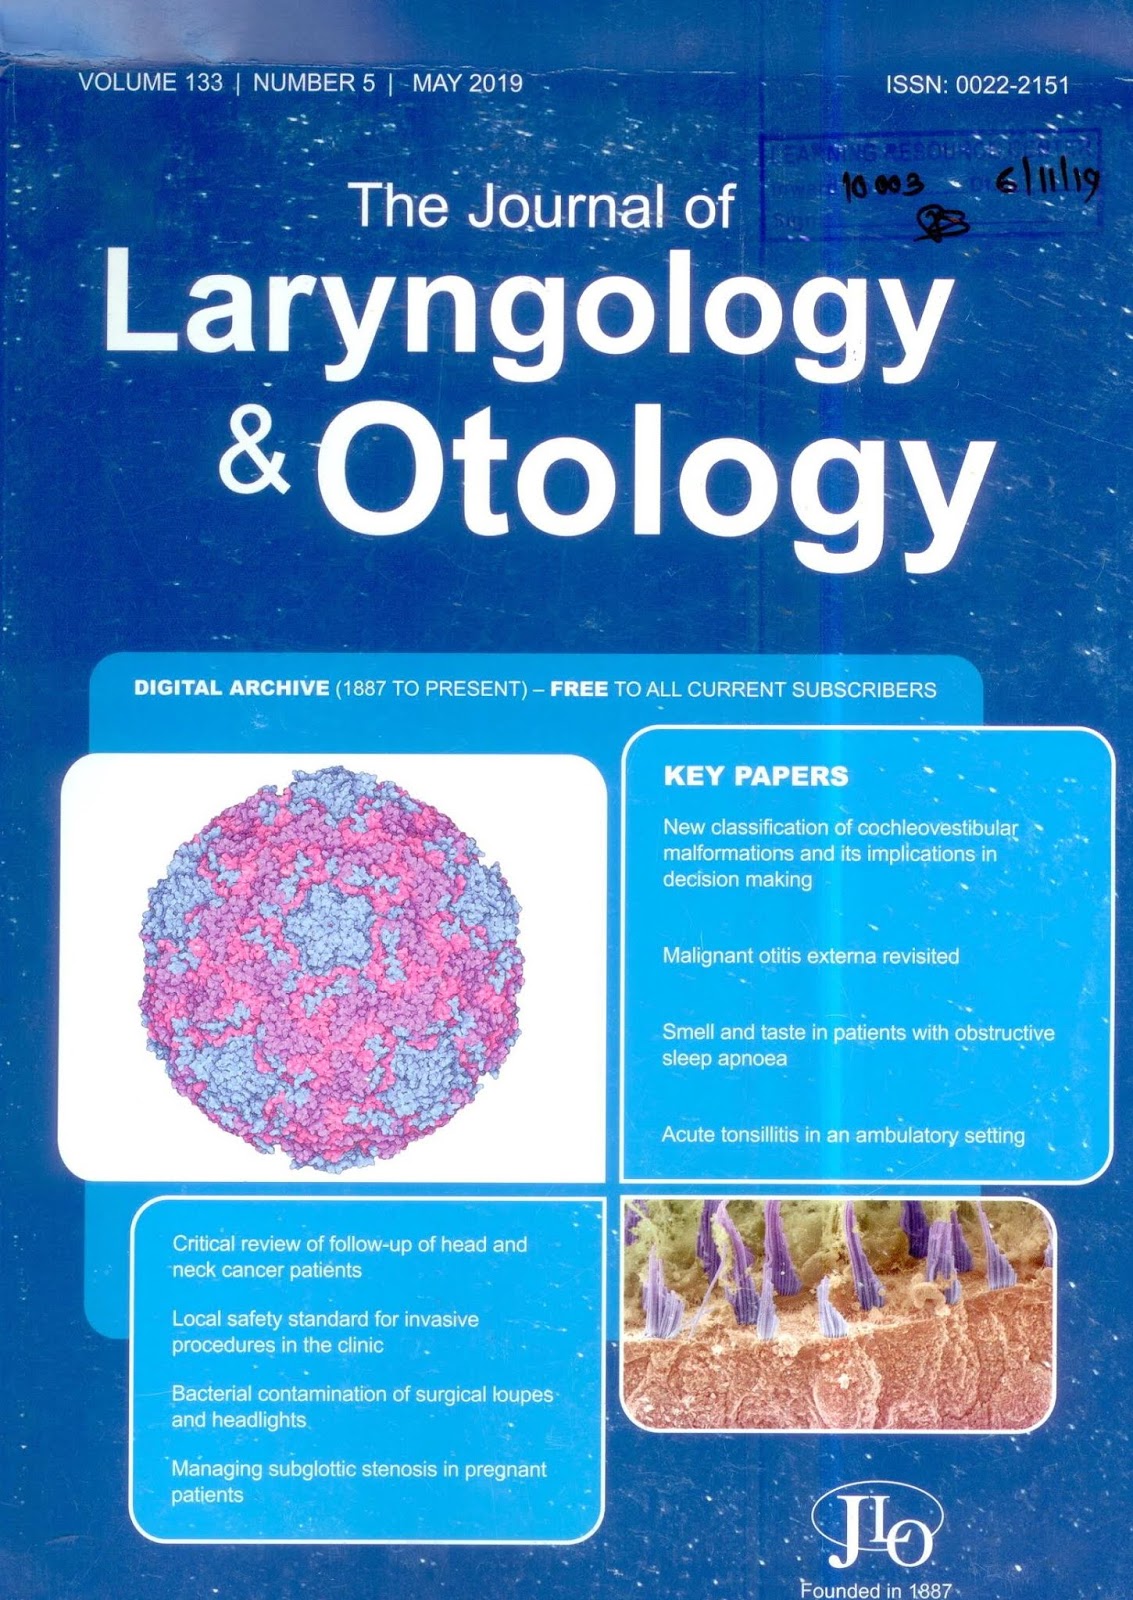 https://www.cambridge.org/core/journals/journal-of-laryngology-and-otology/issue/56852363EAB1A0BB0EC69477AACAED74